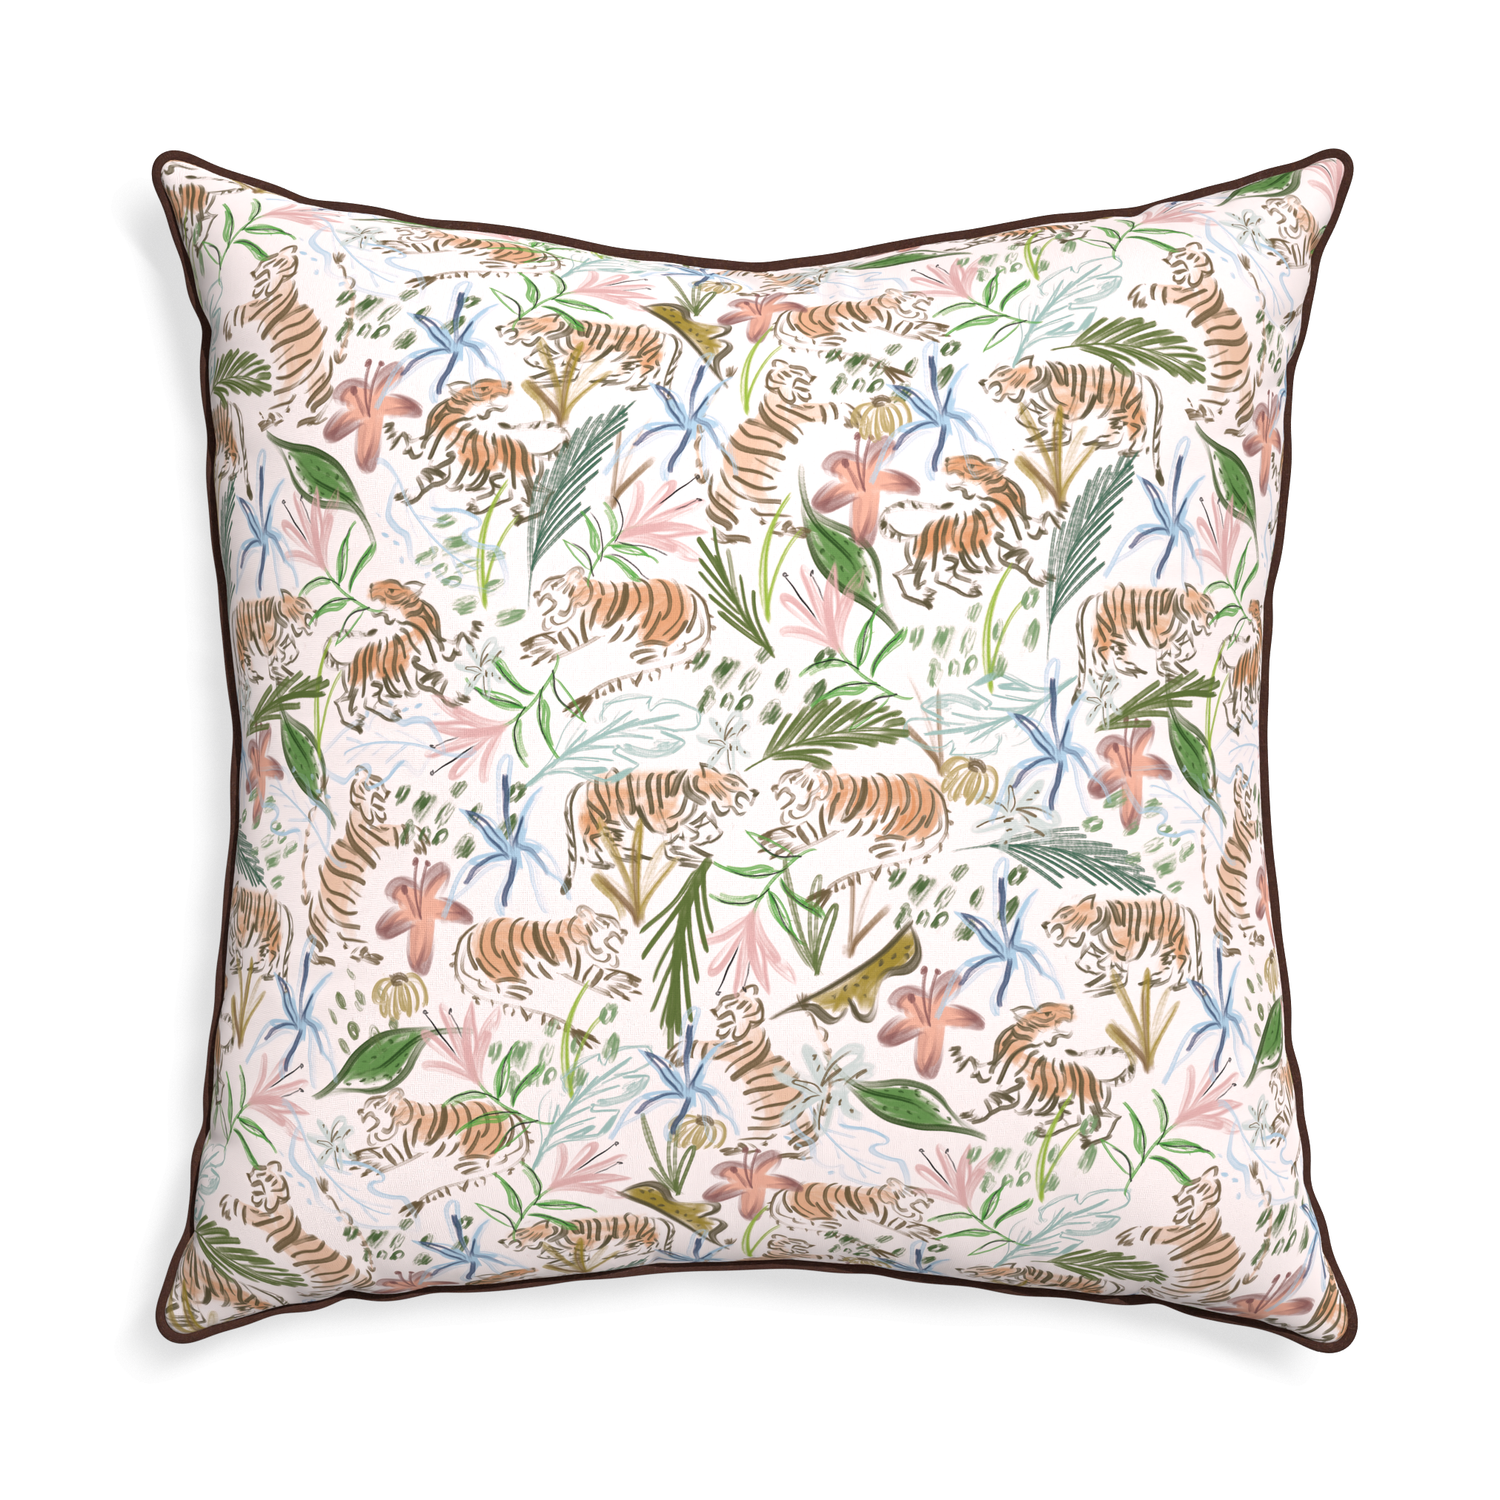 Euro-sham frida pink custom pink chinoiserie tigerpillow with w piping on white background